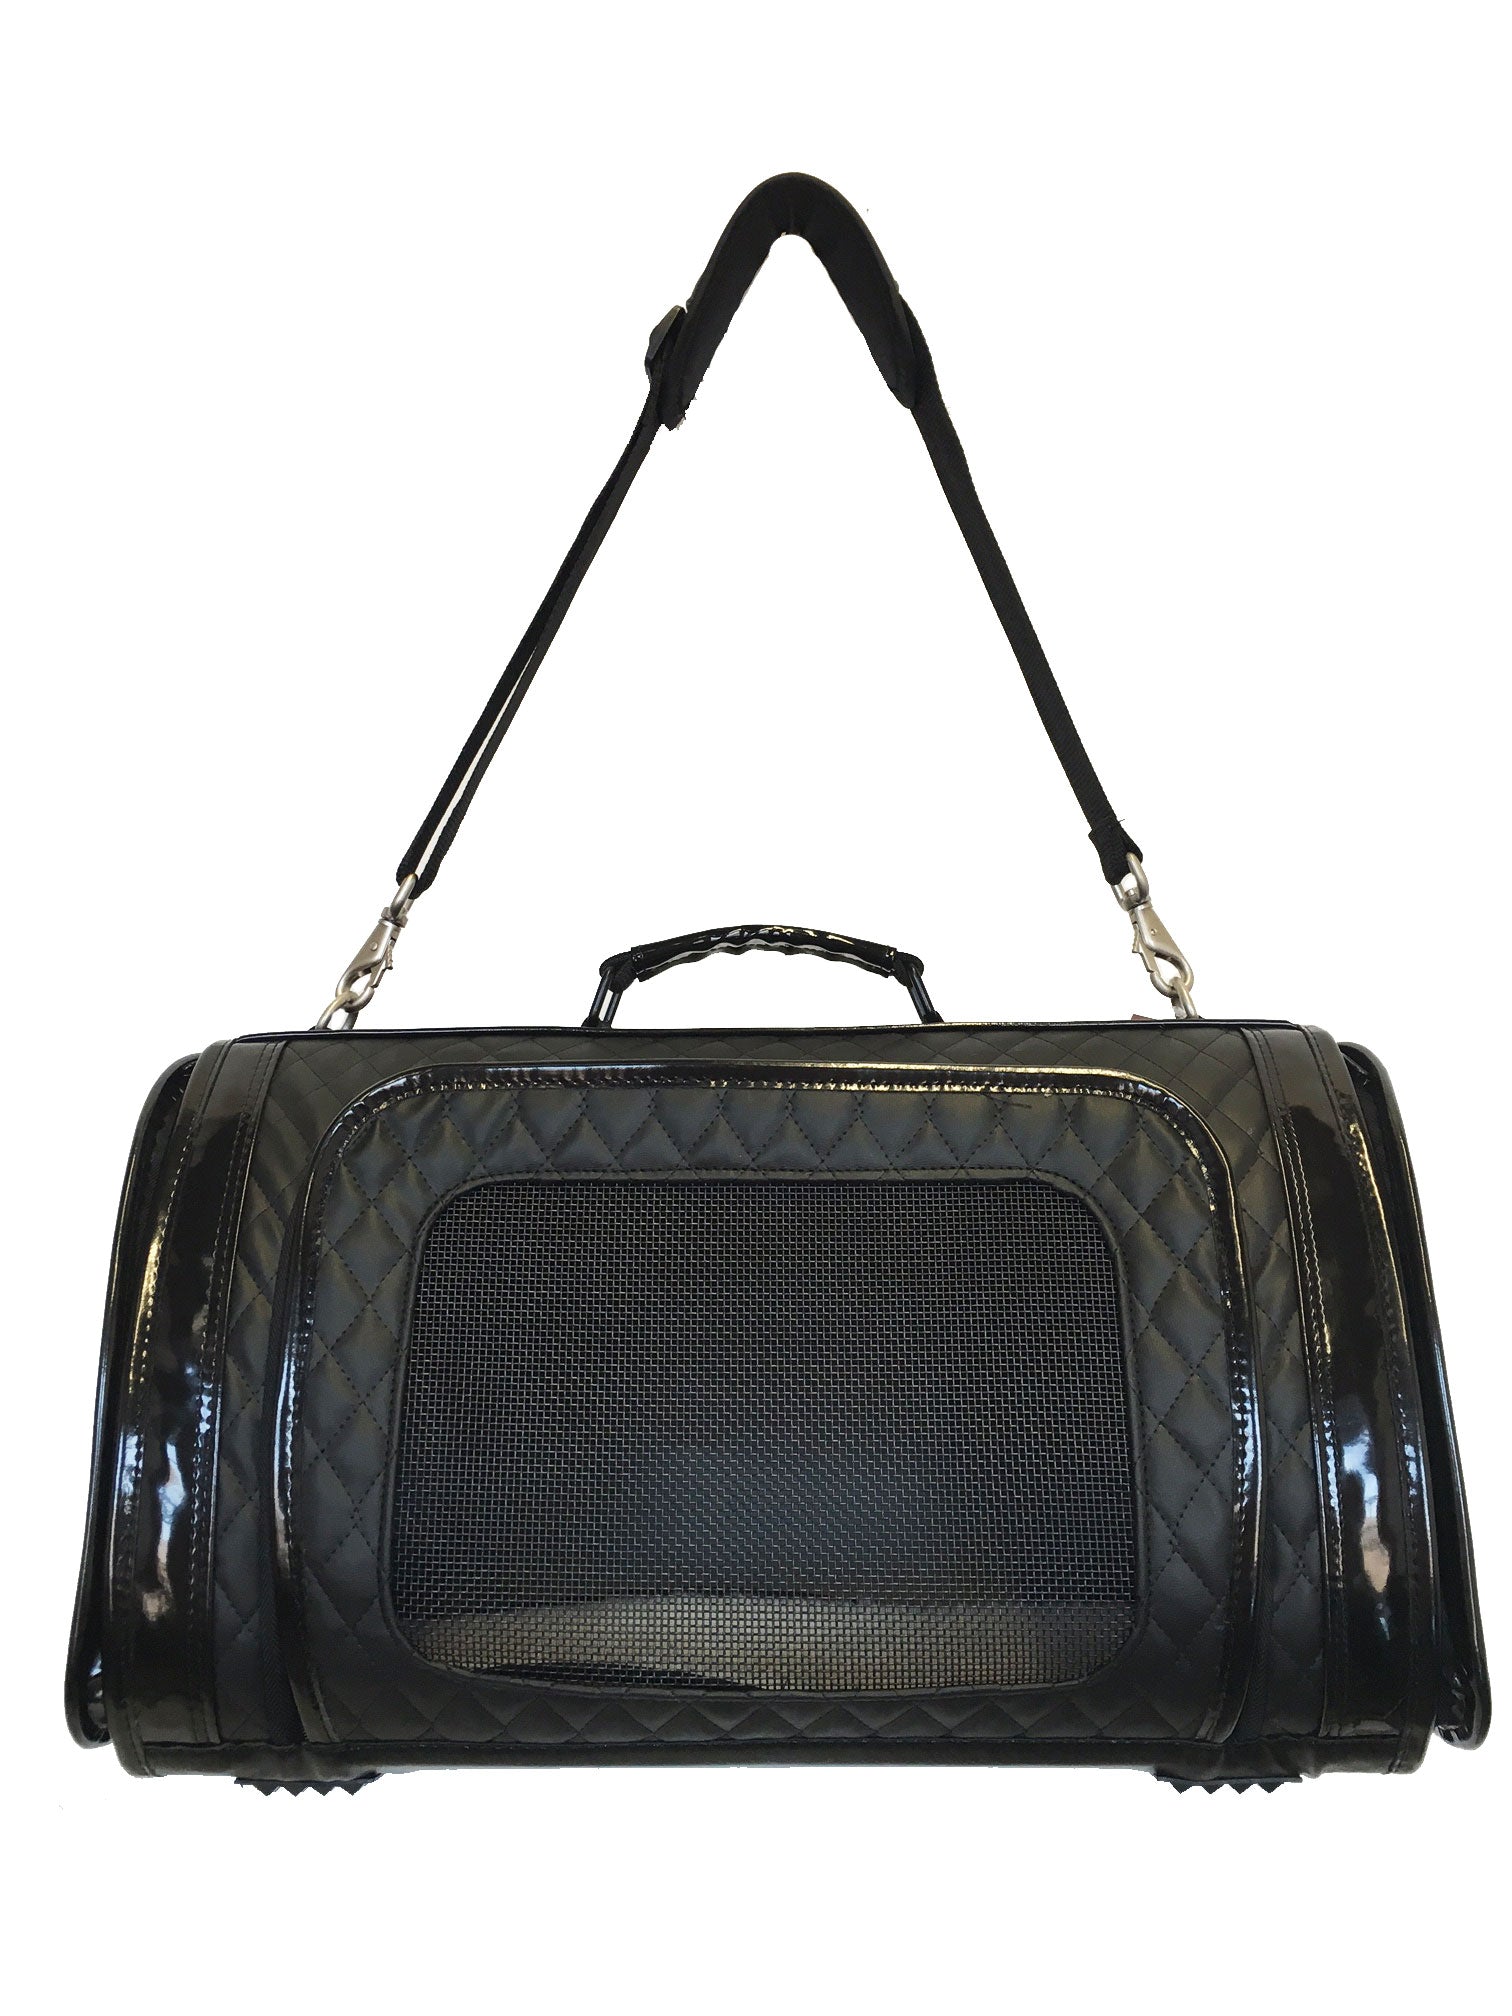 Kelle Quilted Pet Carrier in Black